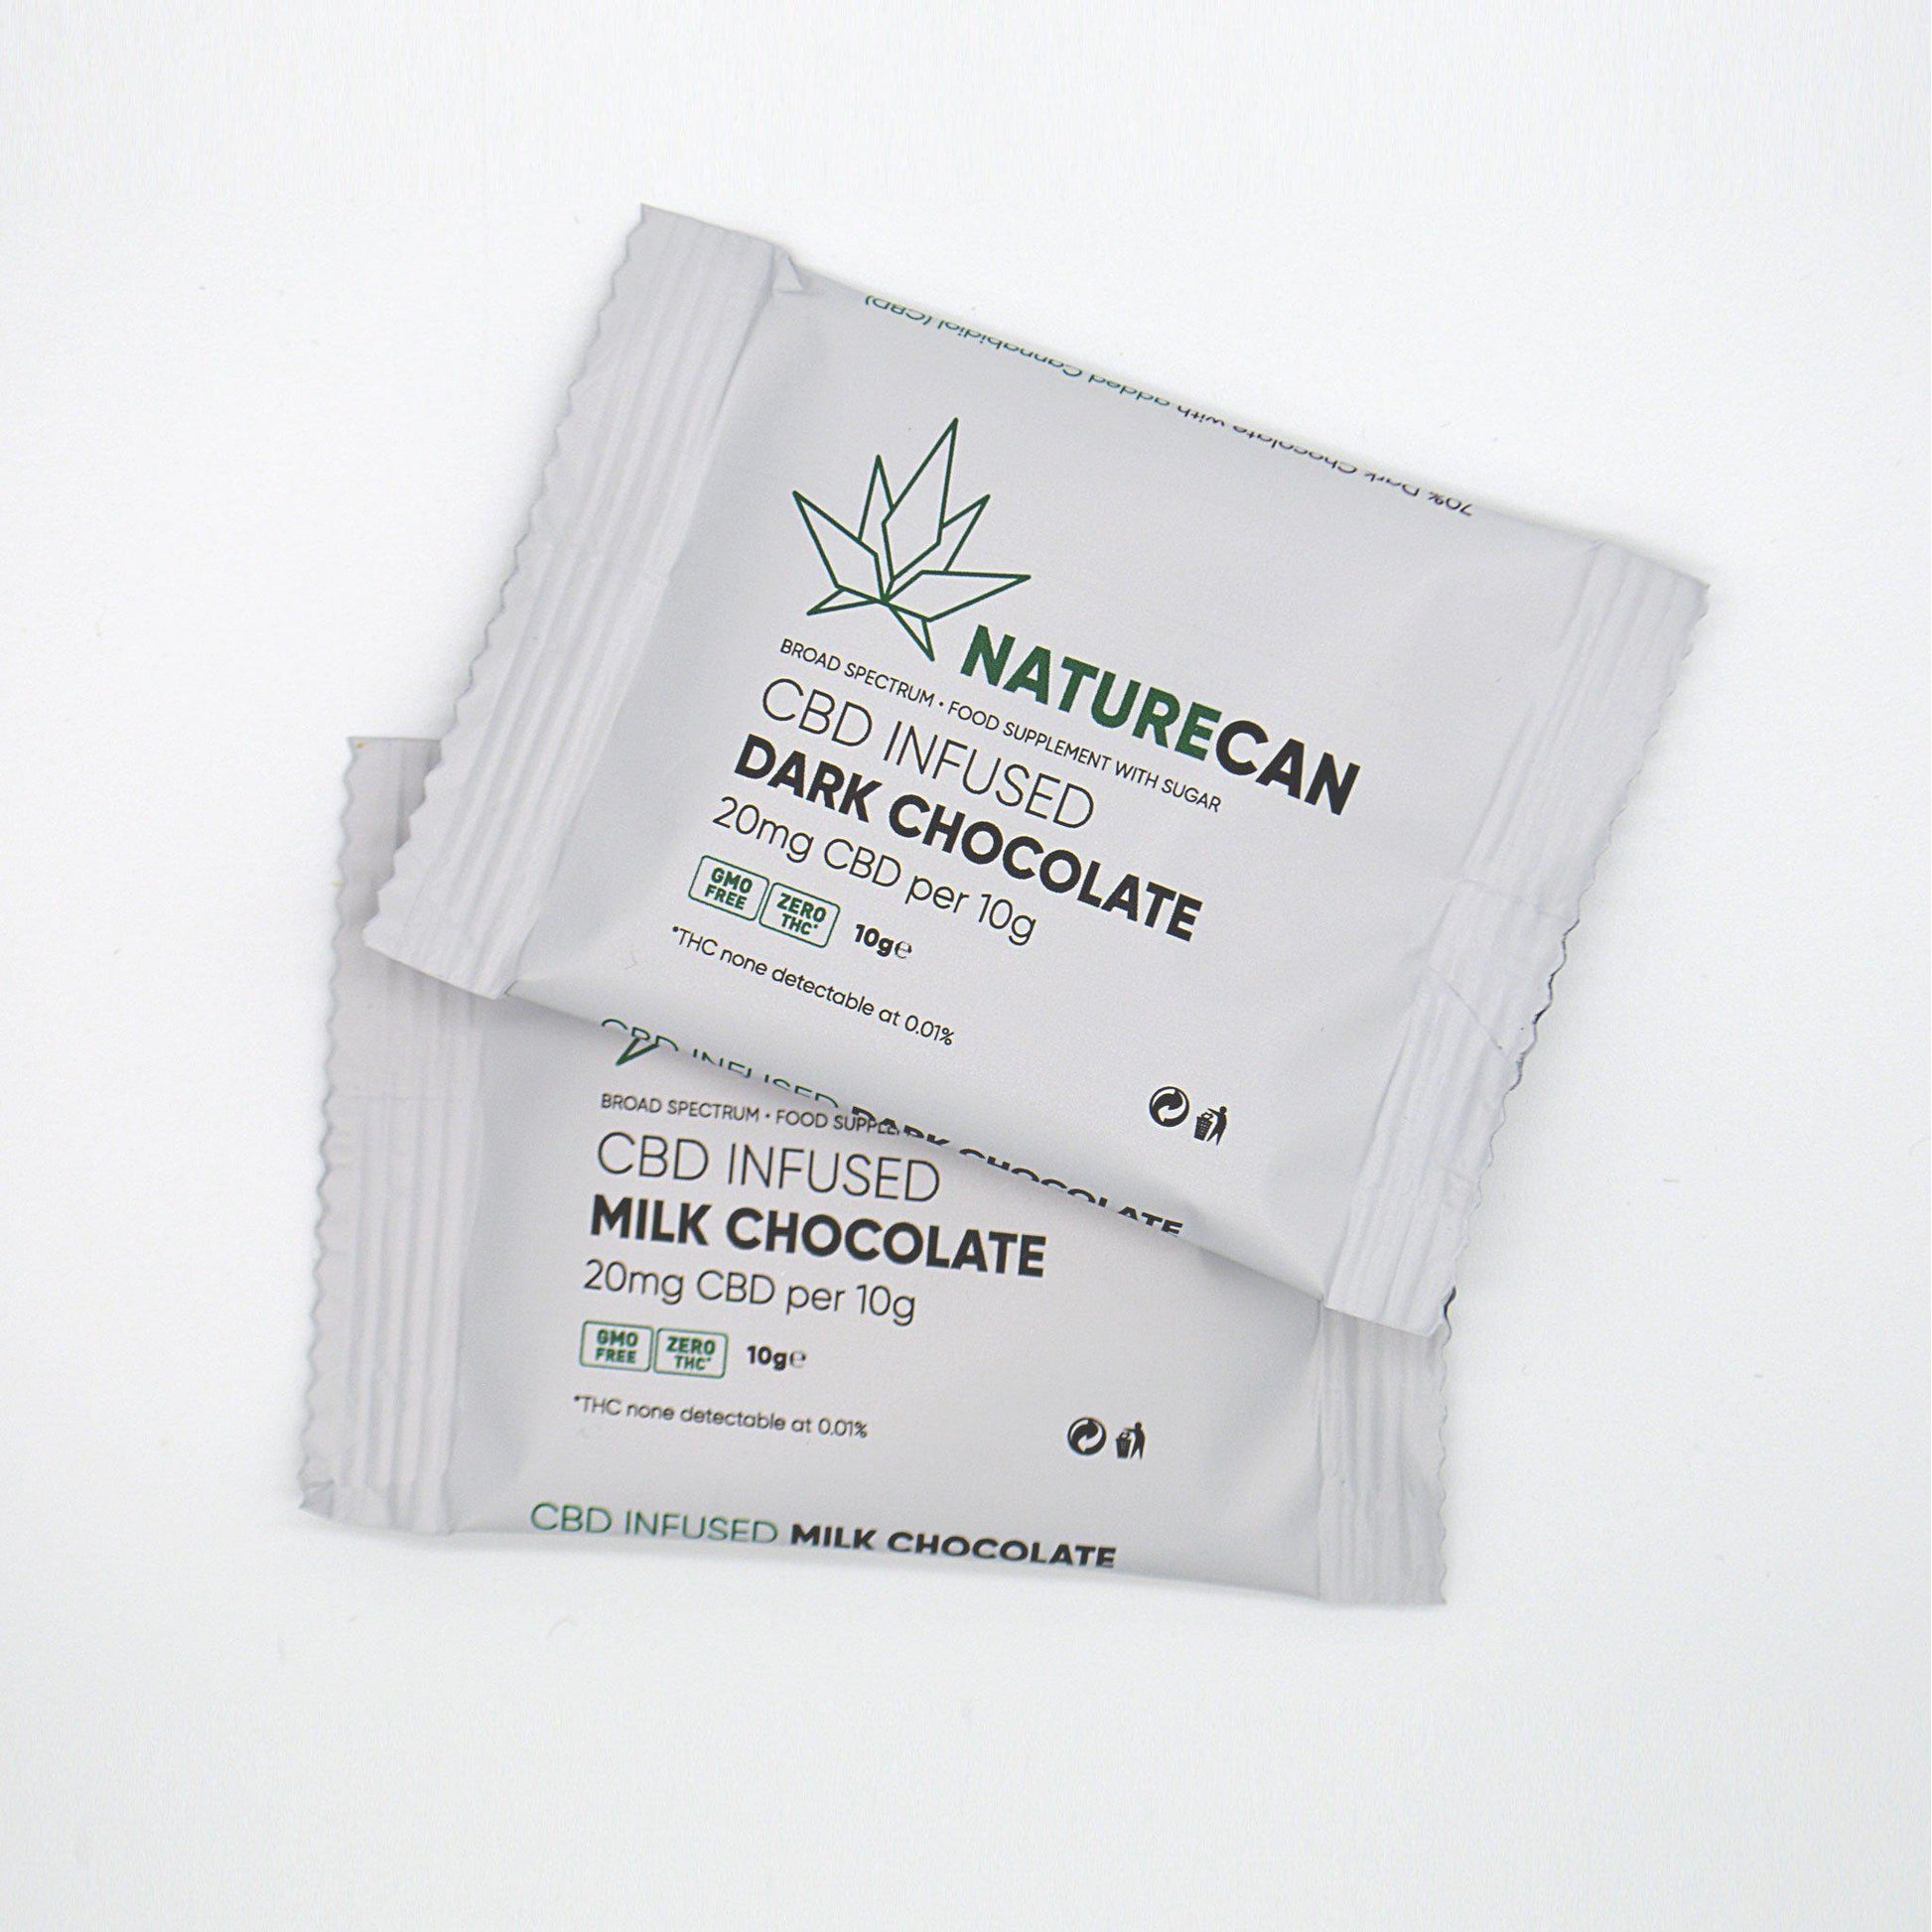 Two bars of CBD chocolate in packets